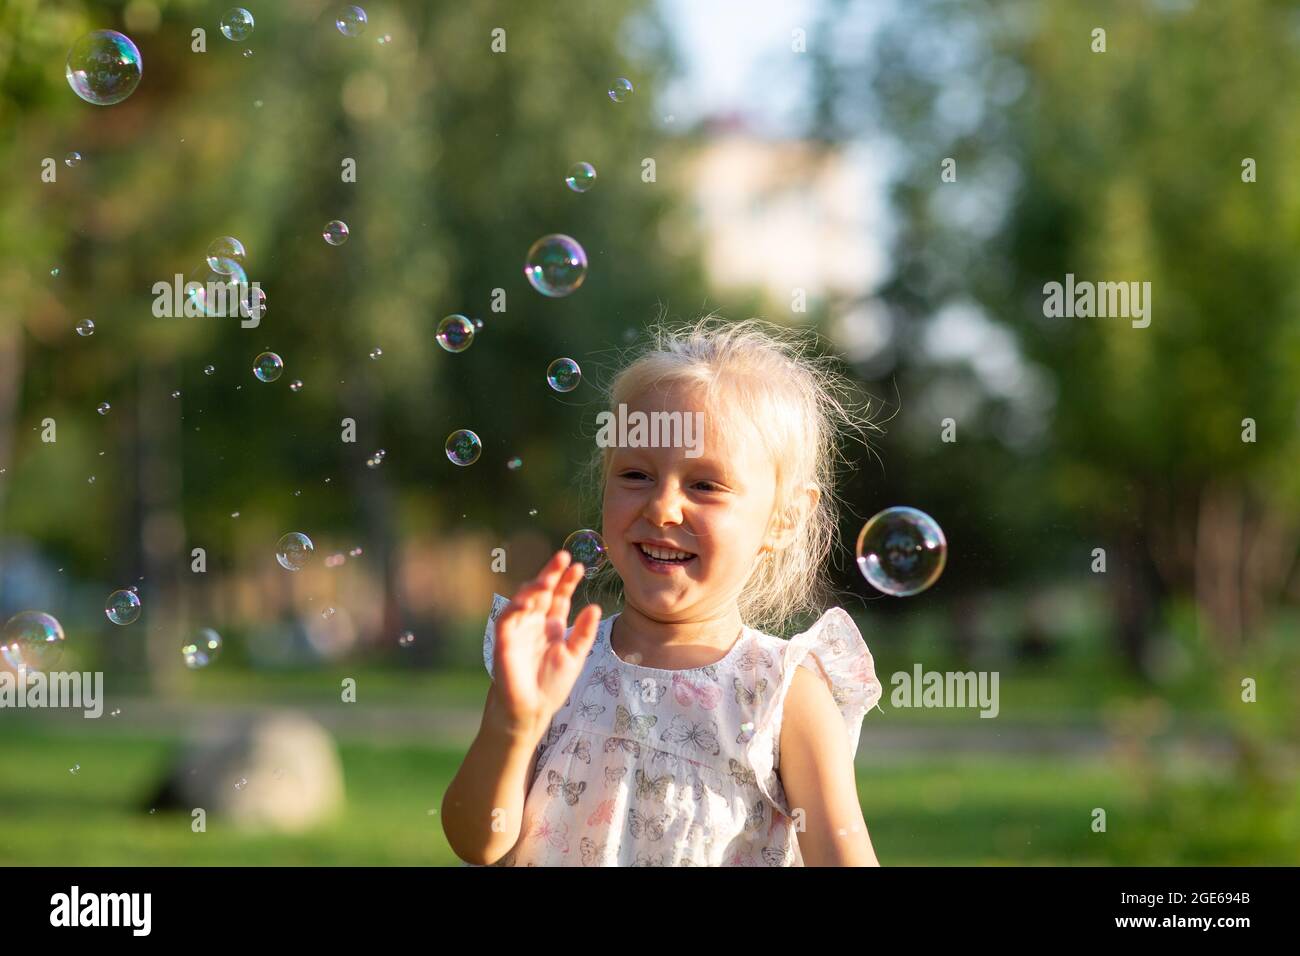 Little cute girl in the summer park blowing bubbles and having fun. Stock Photo